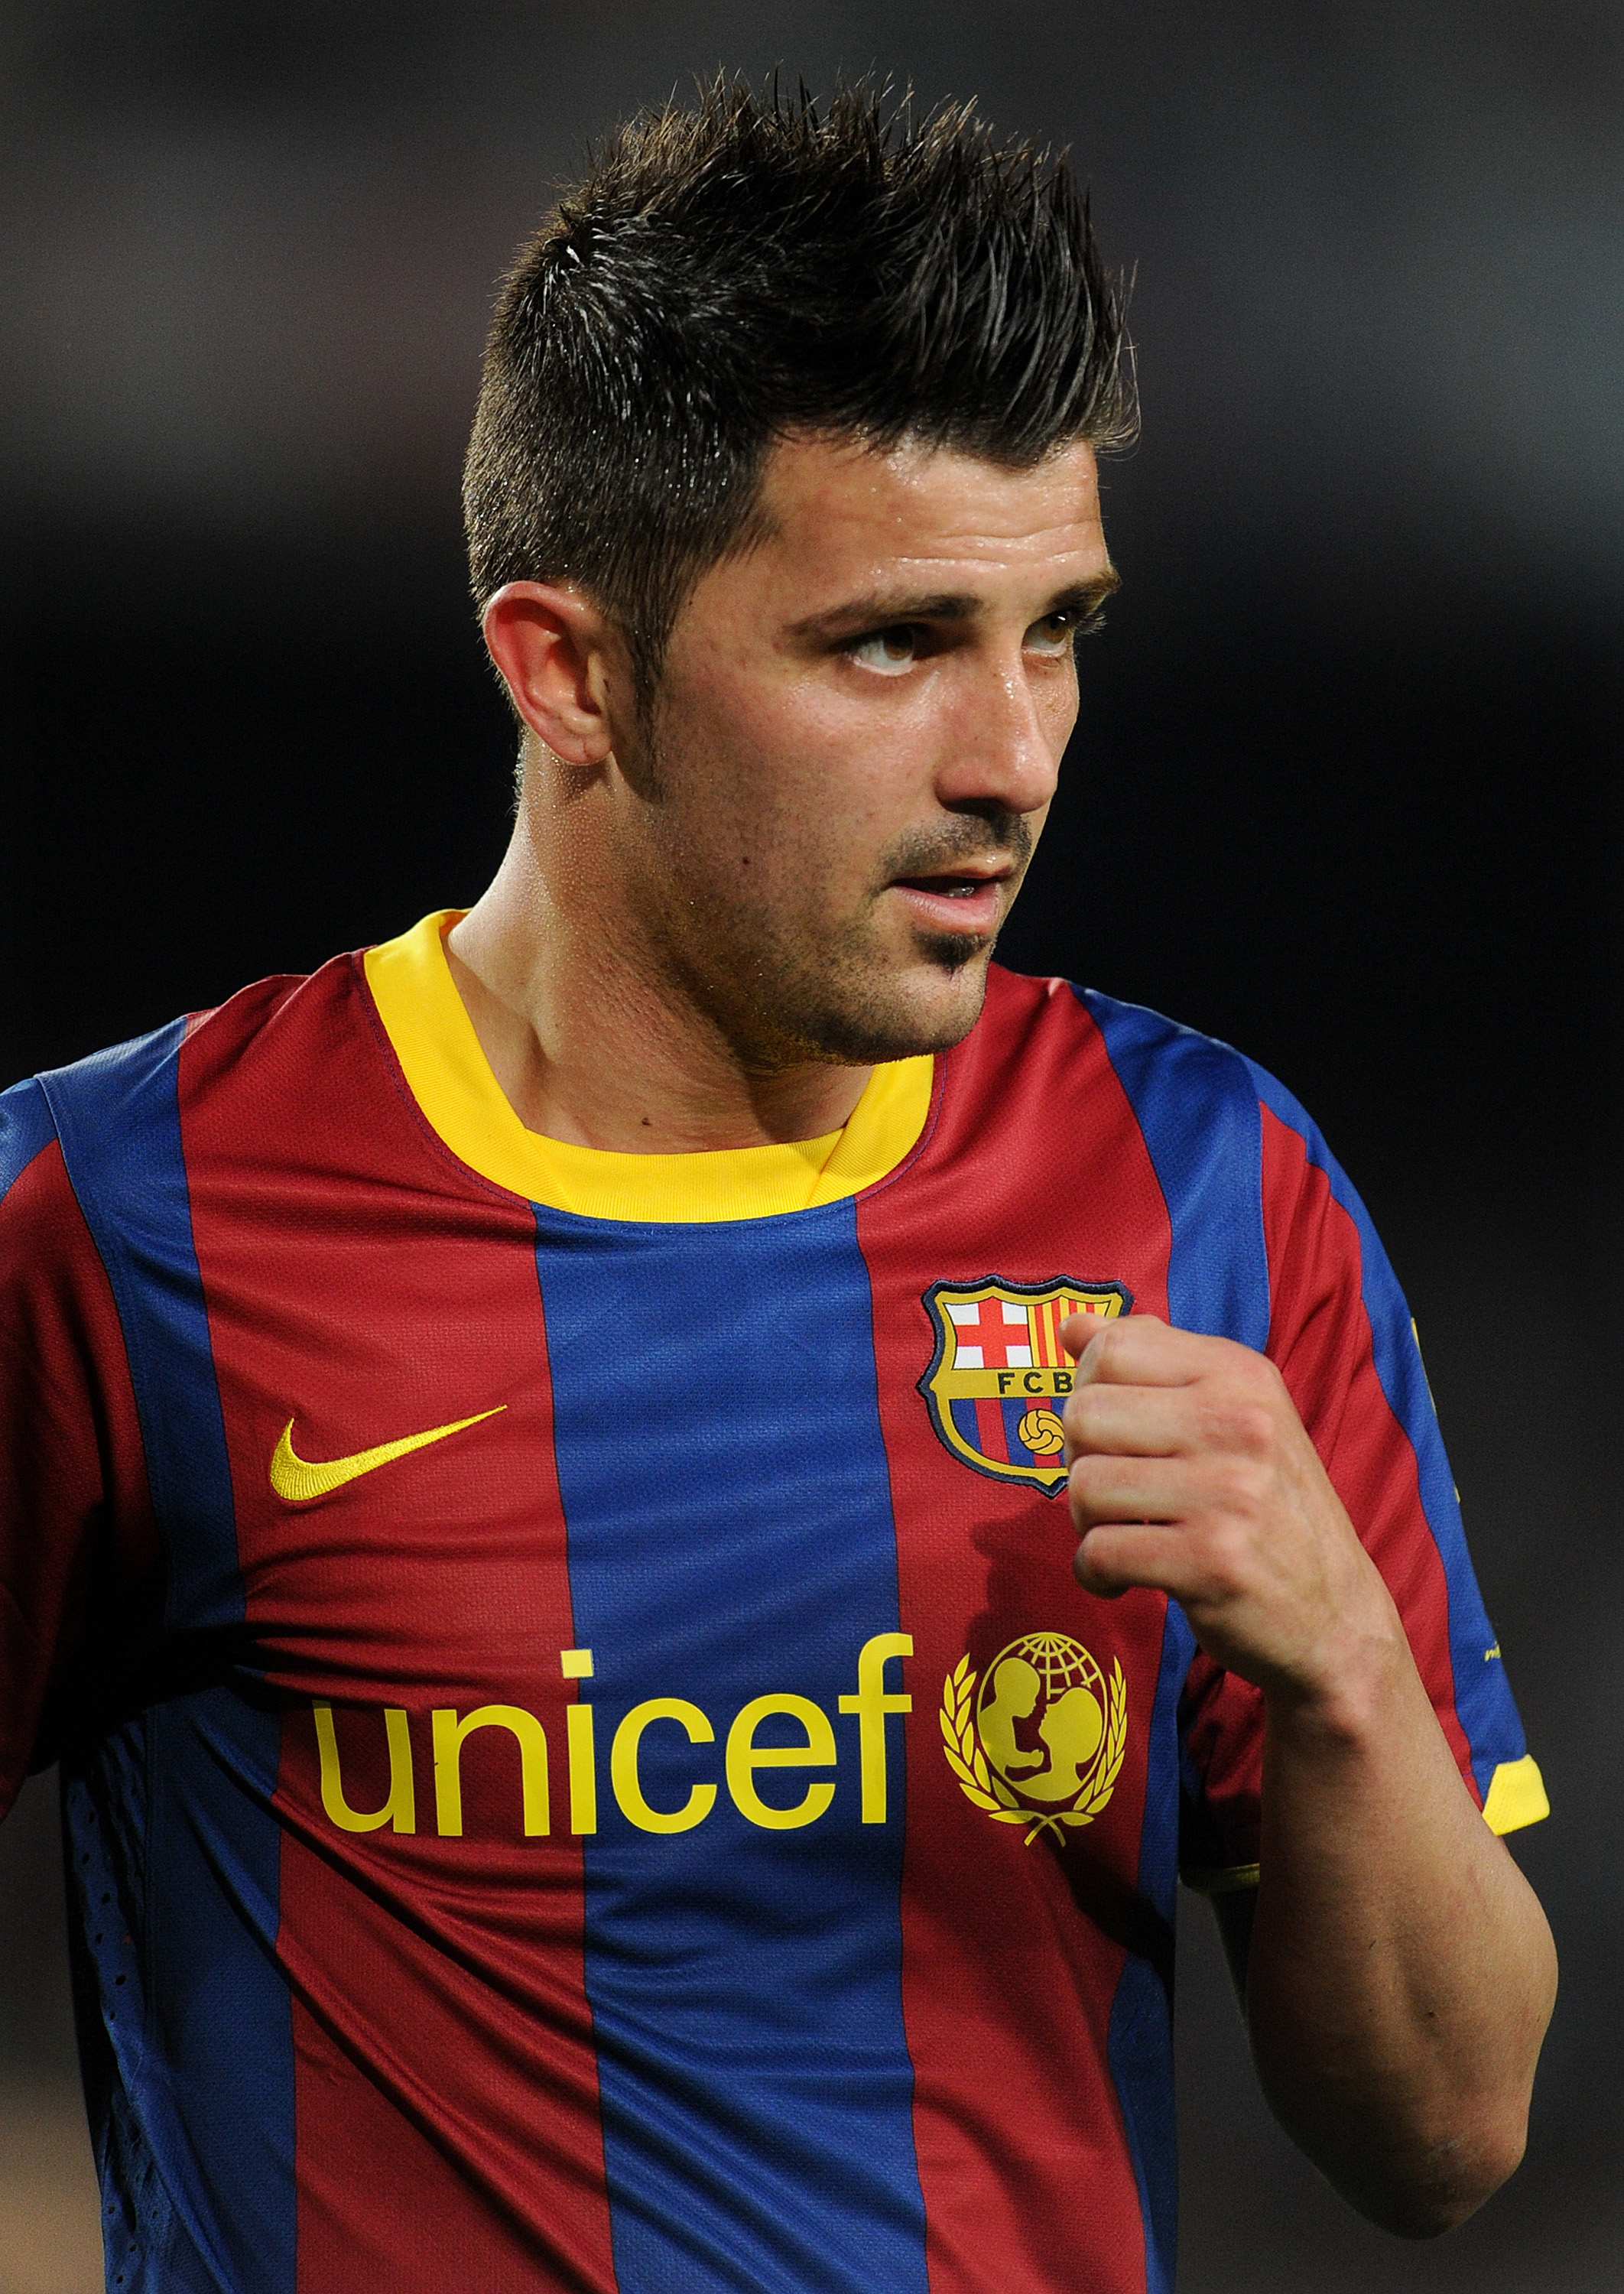 BARCELONA, SPAIN - APRIL 09:  David Villa of Barcelona looks on during the la Liga match between FC Barcelona and UD Almeria at the Camp Nou stadium on April 9, 2011 in Barcelona, Spain.  (Photo by Jasper Juinen/Getty Images)